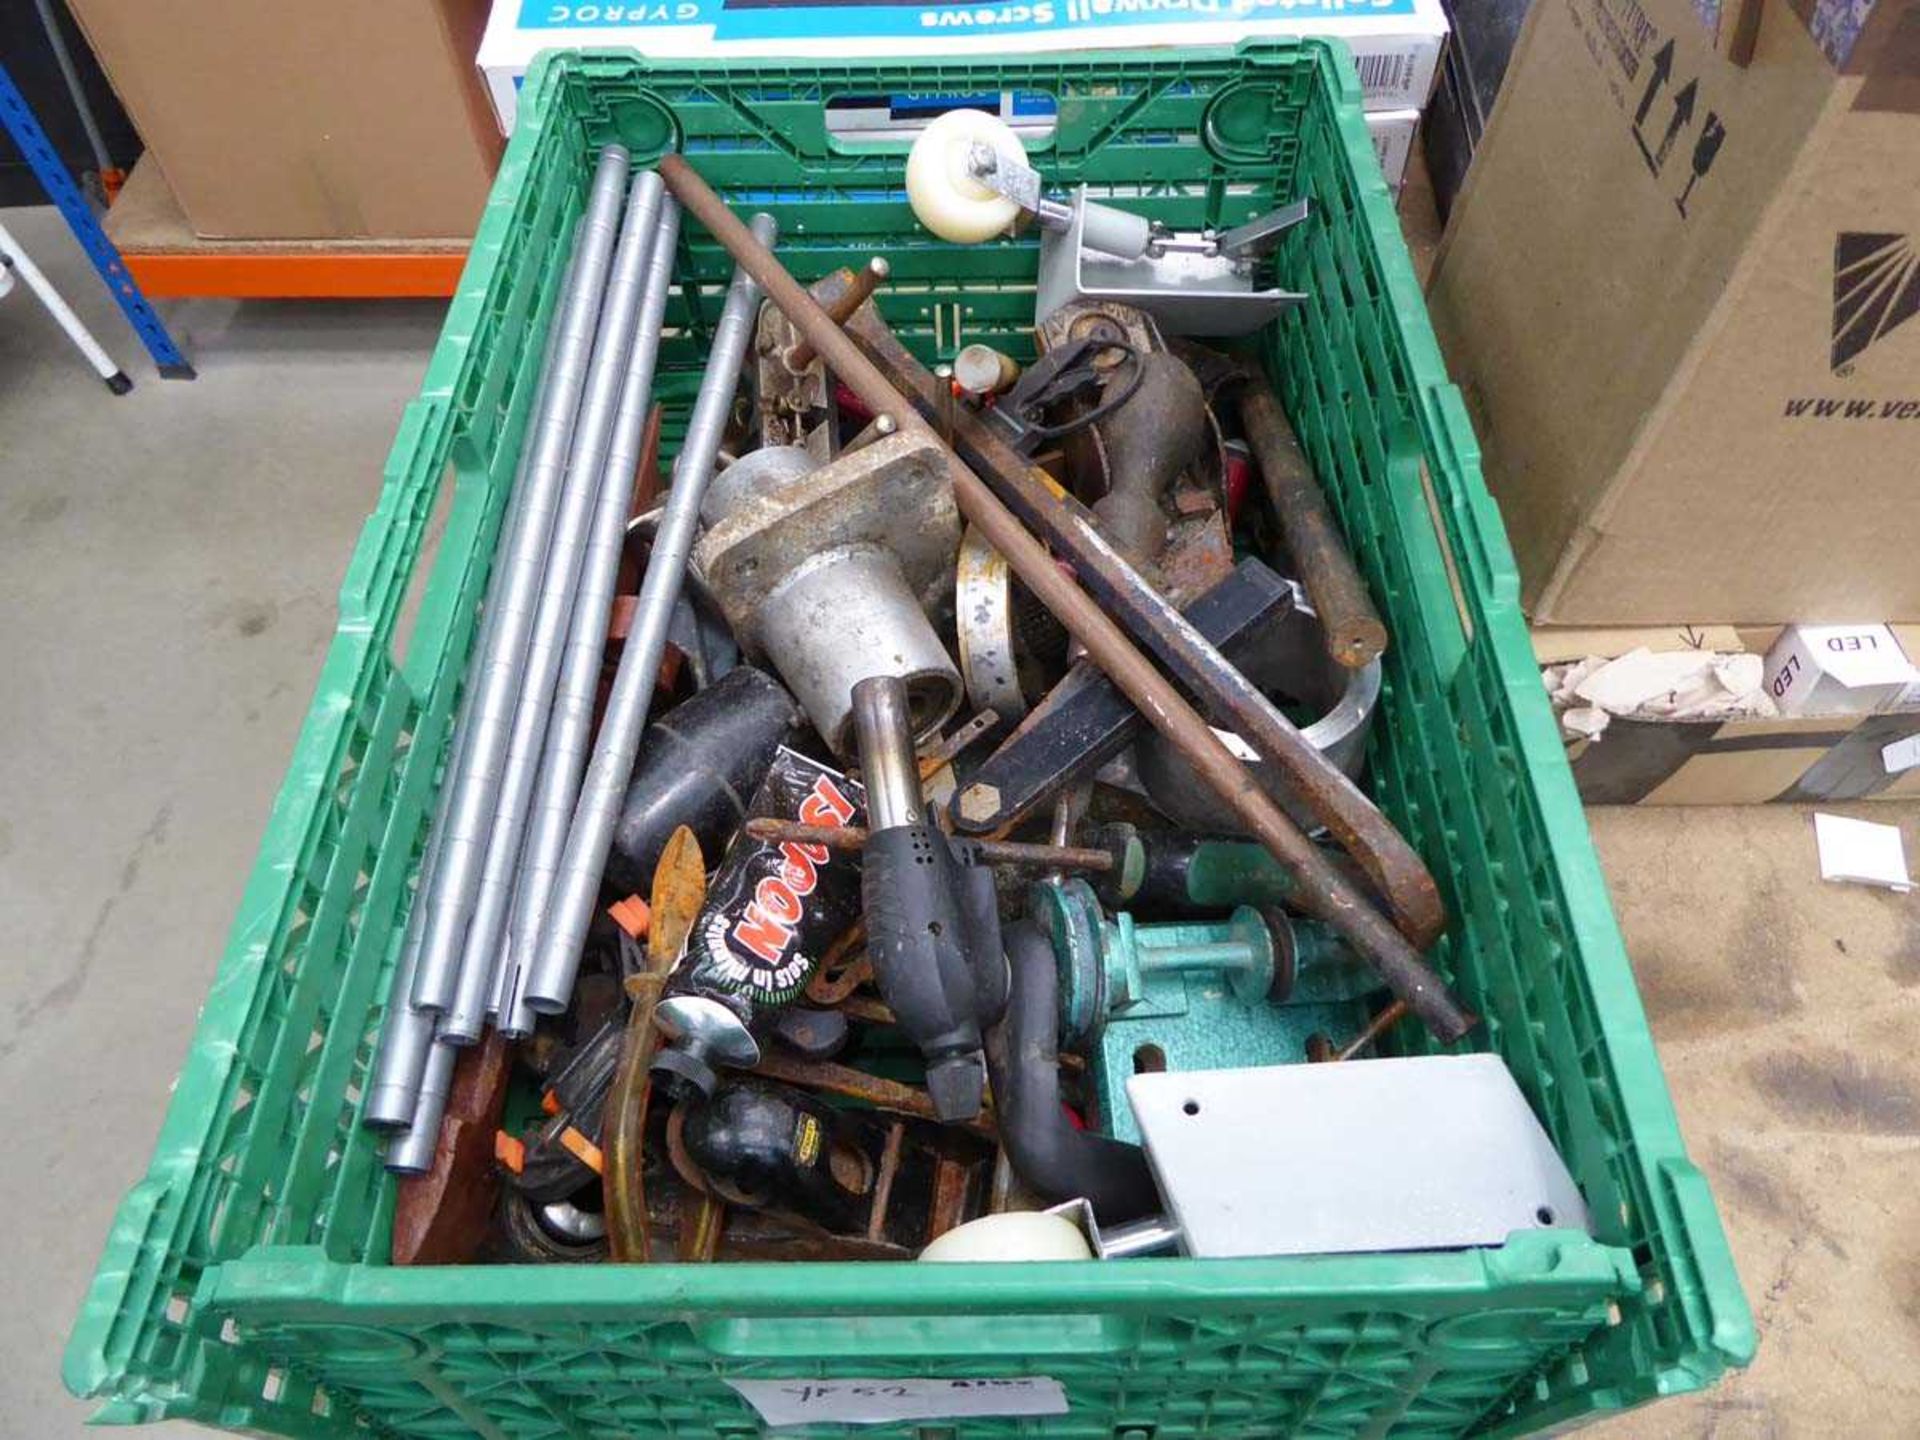 Green crate of assorted tools to include plane bodies, hammers, clamps etc.